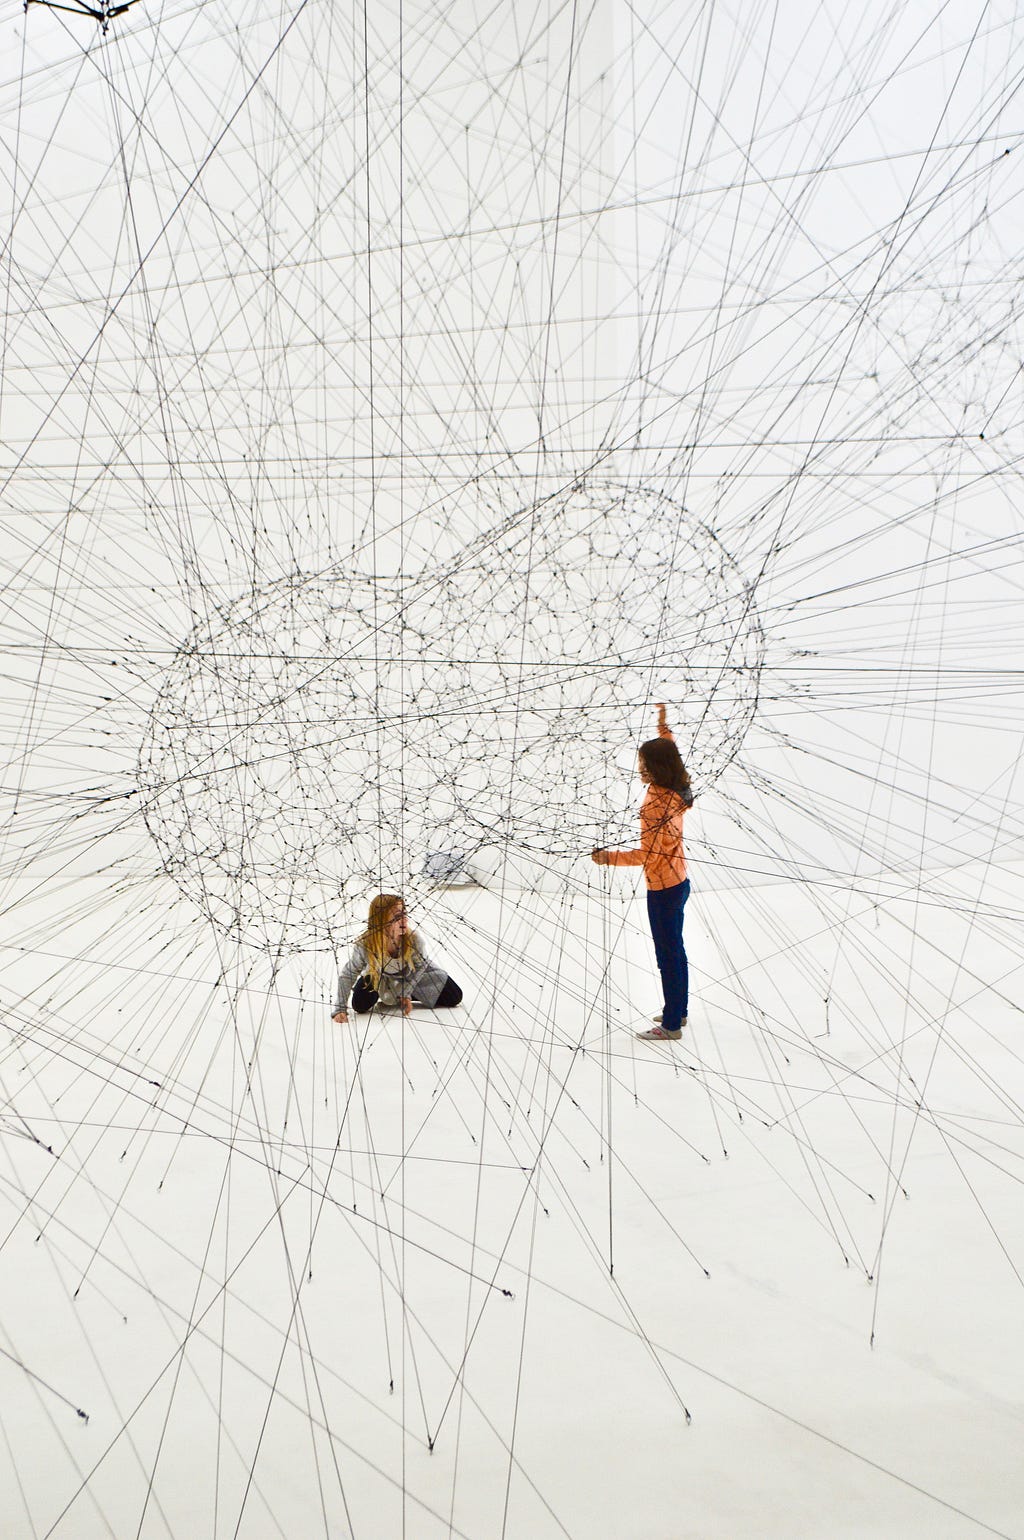 Two children play in an interconnected web of threads creating two colliding spheres with their interscetions.